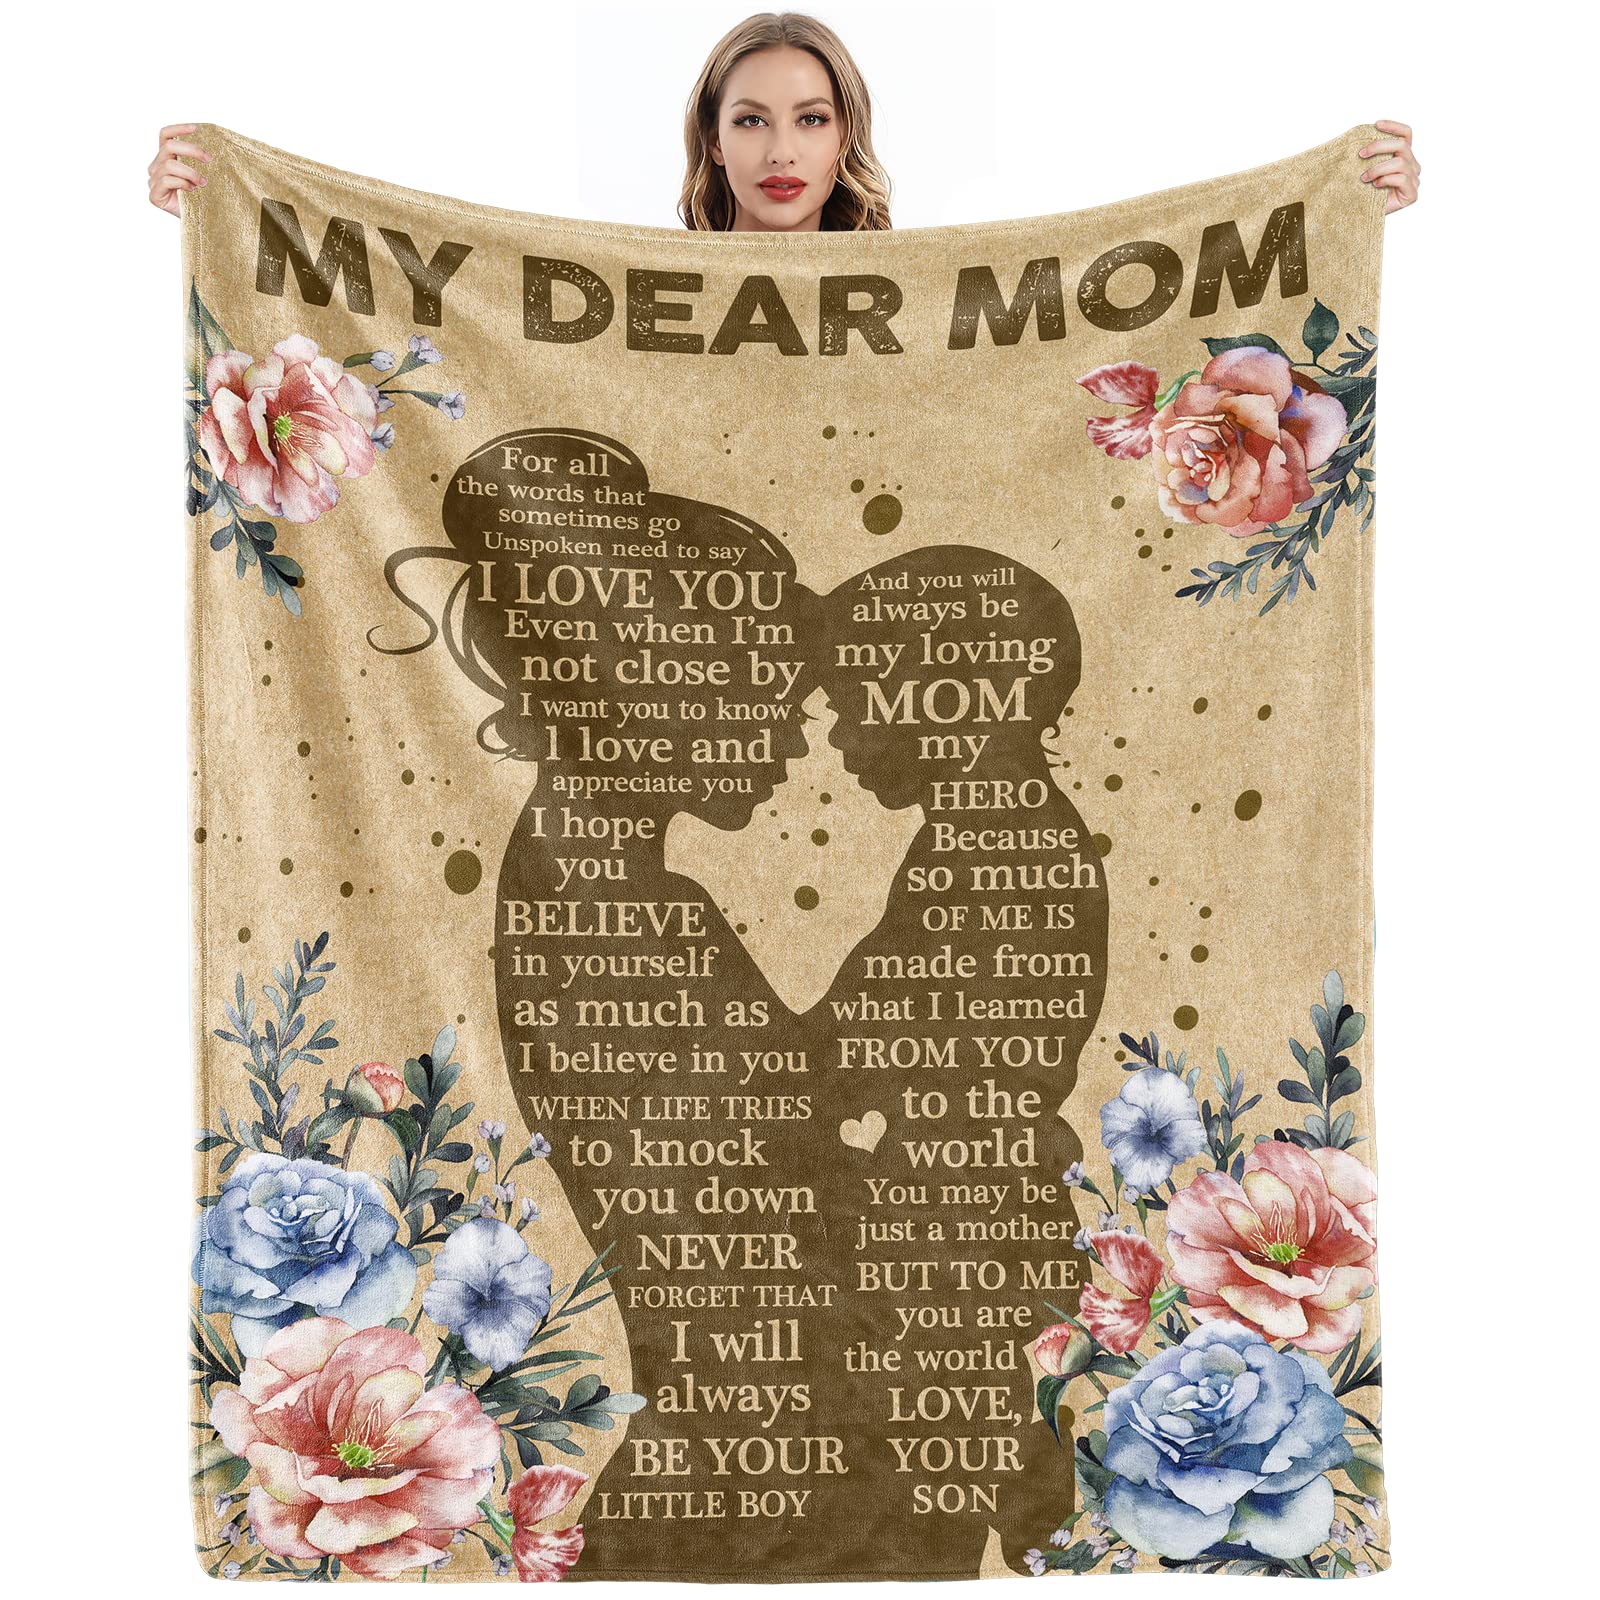 lpmisake Gifts for Mom, Mothers Day Birthday Gifts for Mom from Son, Mom Gifts, Mom Blanket from Son, Mom Birthday Gifts, Happy Birthday 